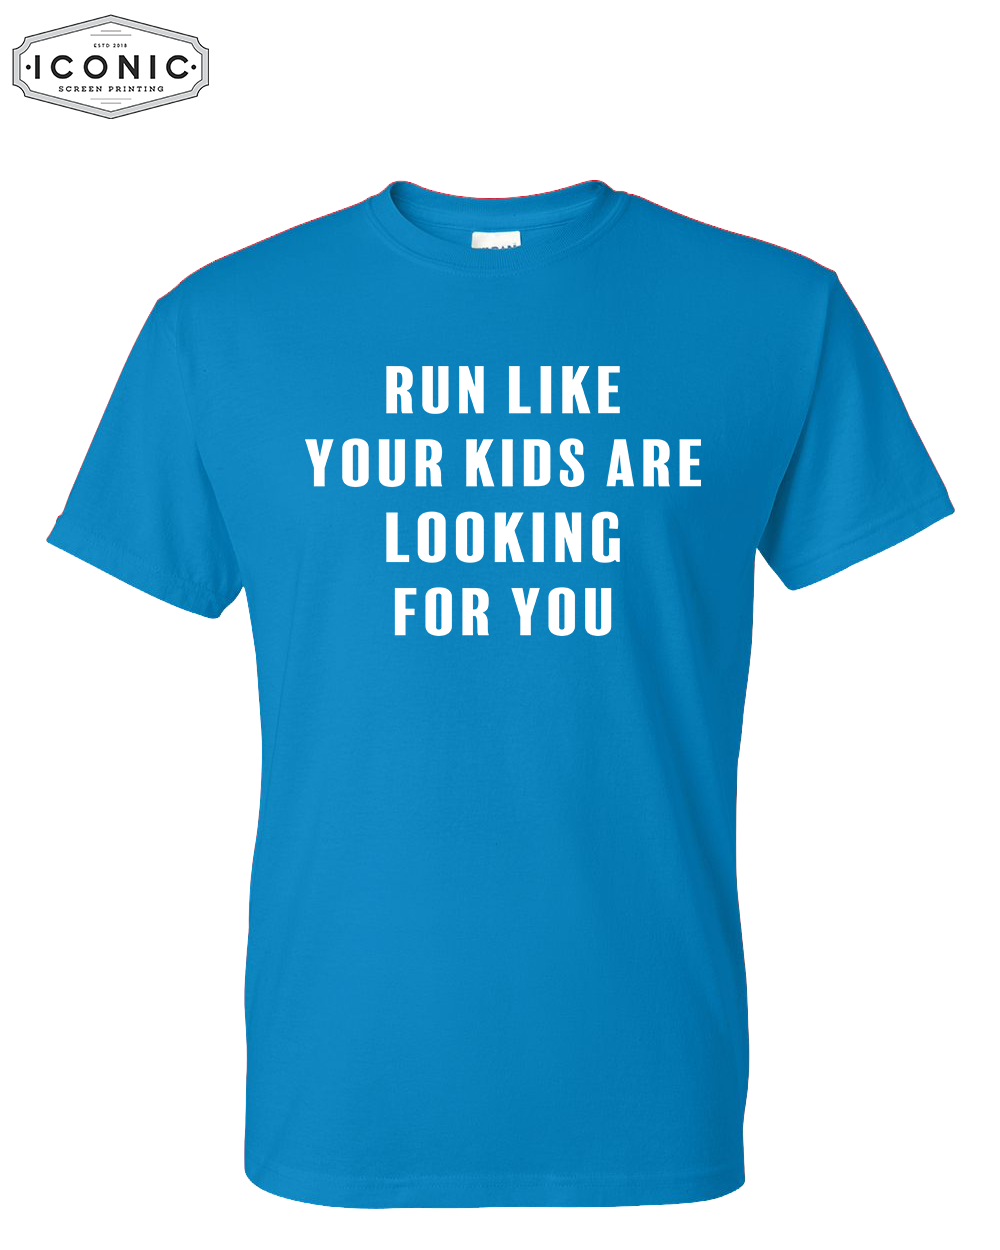 Run Like Your Kids Are Looking For You - DryBlend T-Shirt